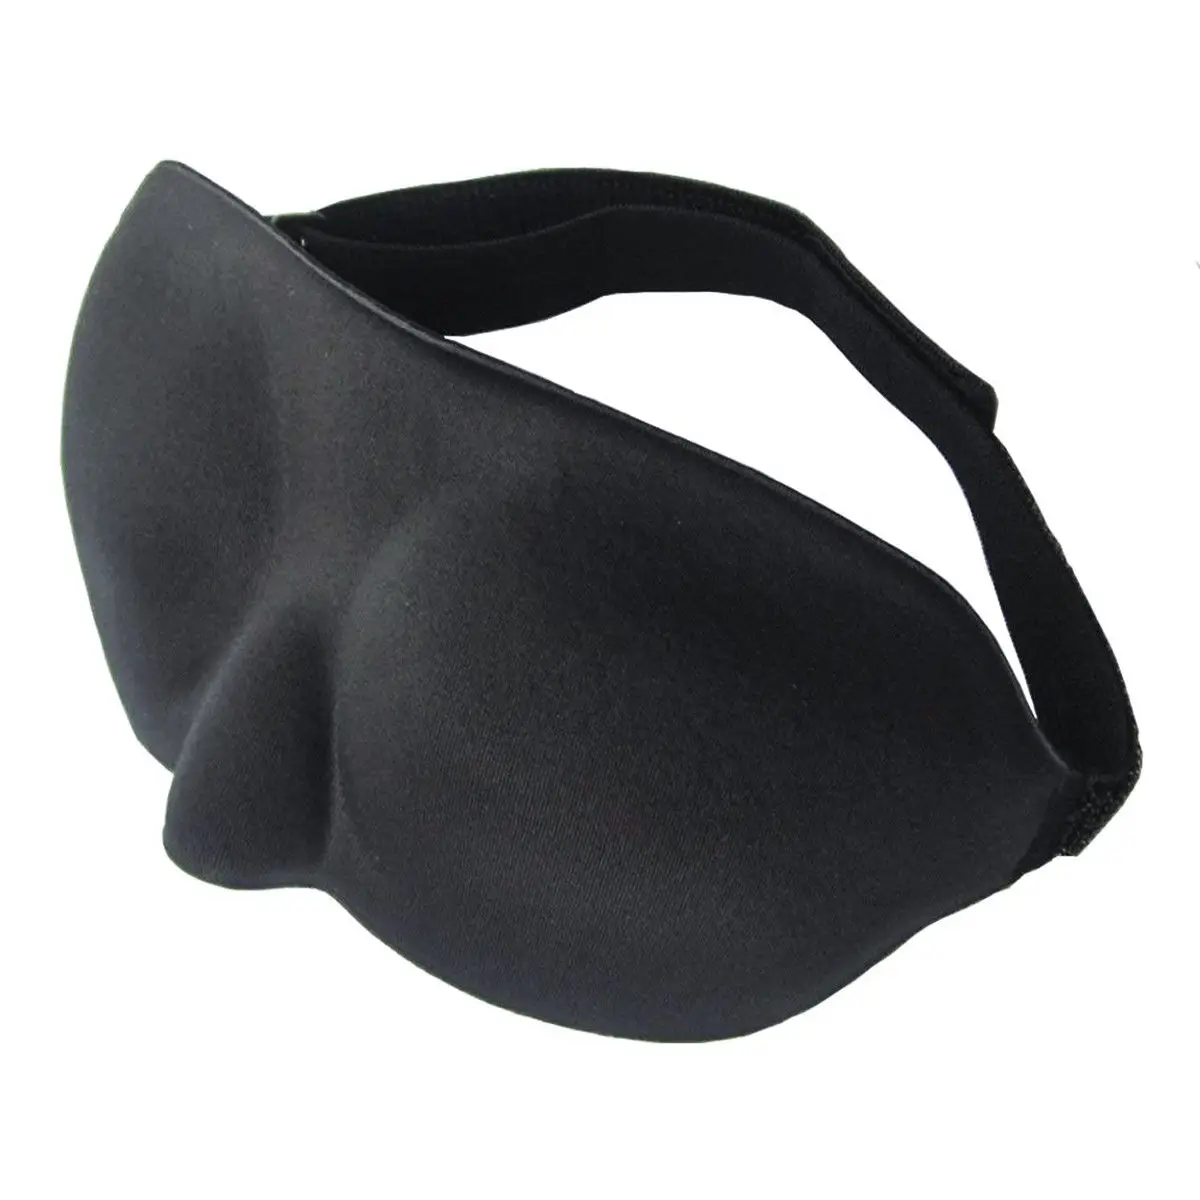 Buy 3D Sleeping eye mask Travel Rest Aid Eye Mask Cover Patch Paded Soft Blindfold Relax Massager Beauty Tools on